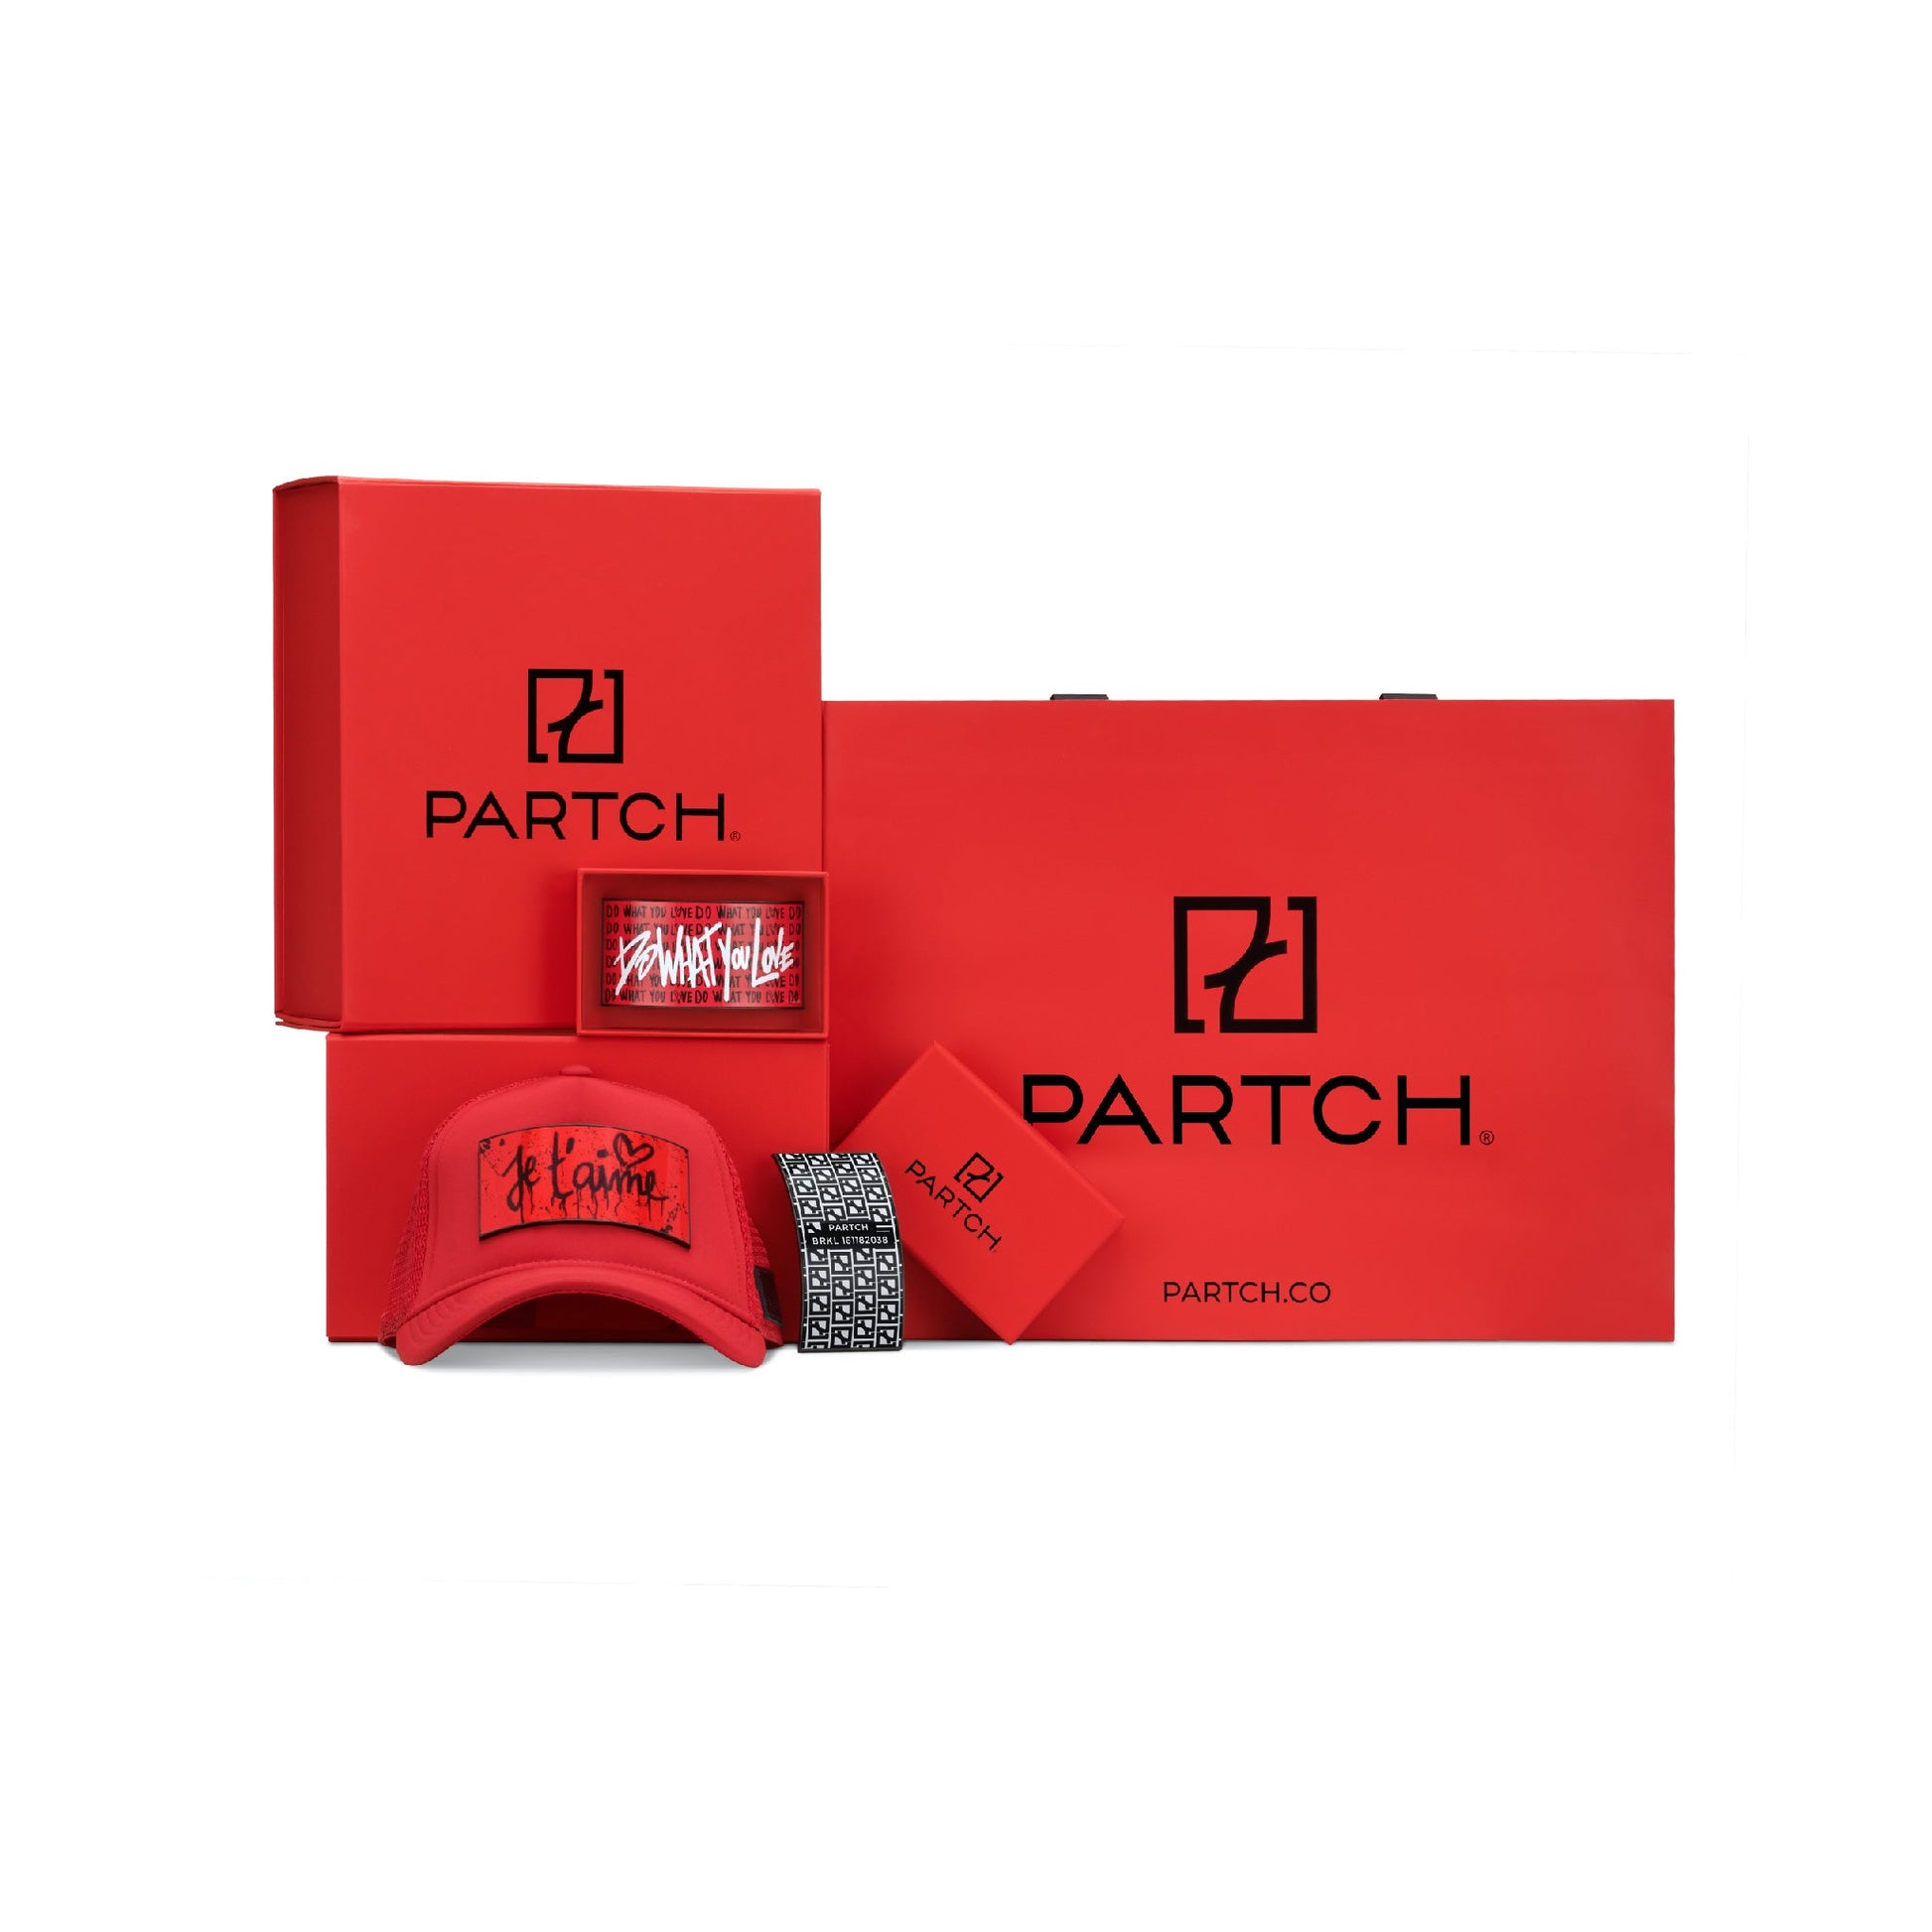 PARTCH Luxury Packaging. Shopping bag, bags, hats, box, caps, Partch-clip